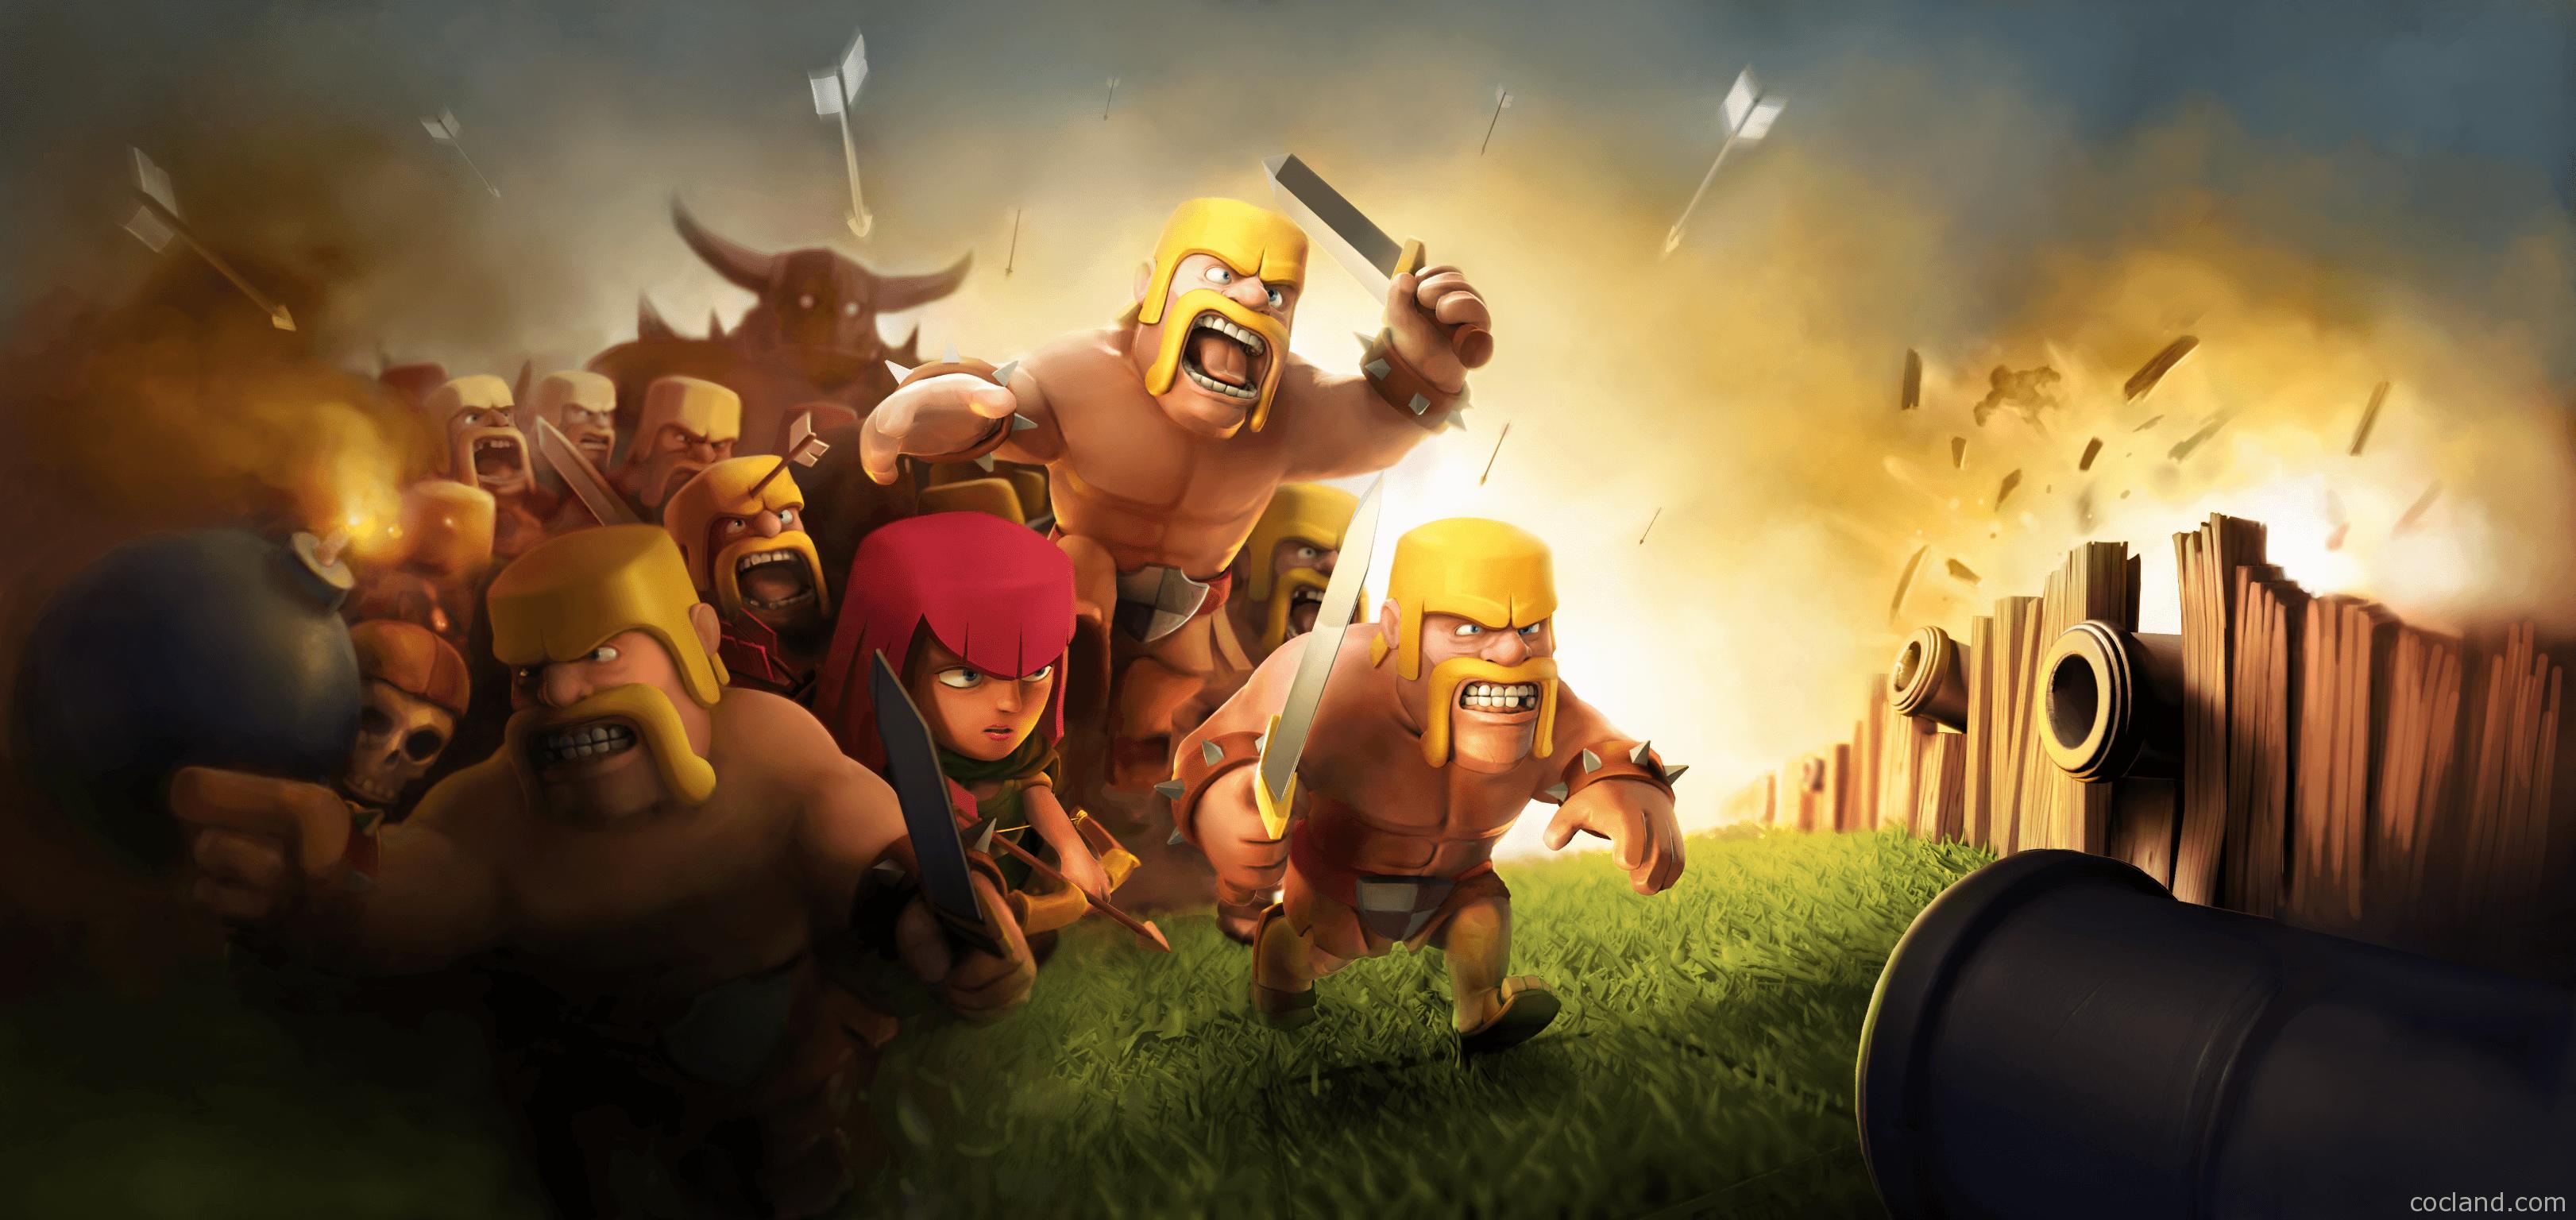 Clash Of Clans Wallpaper, Clash Of Clans, Game